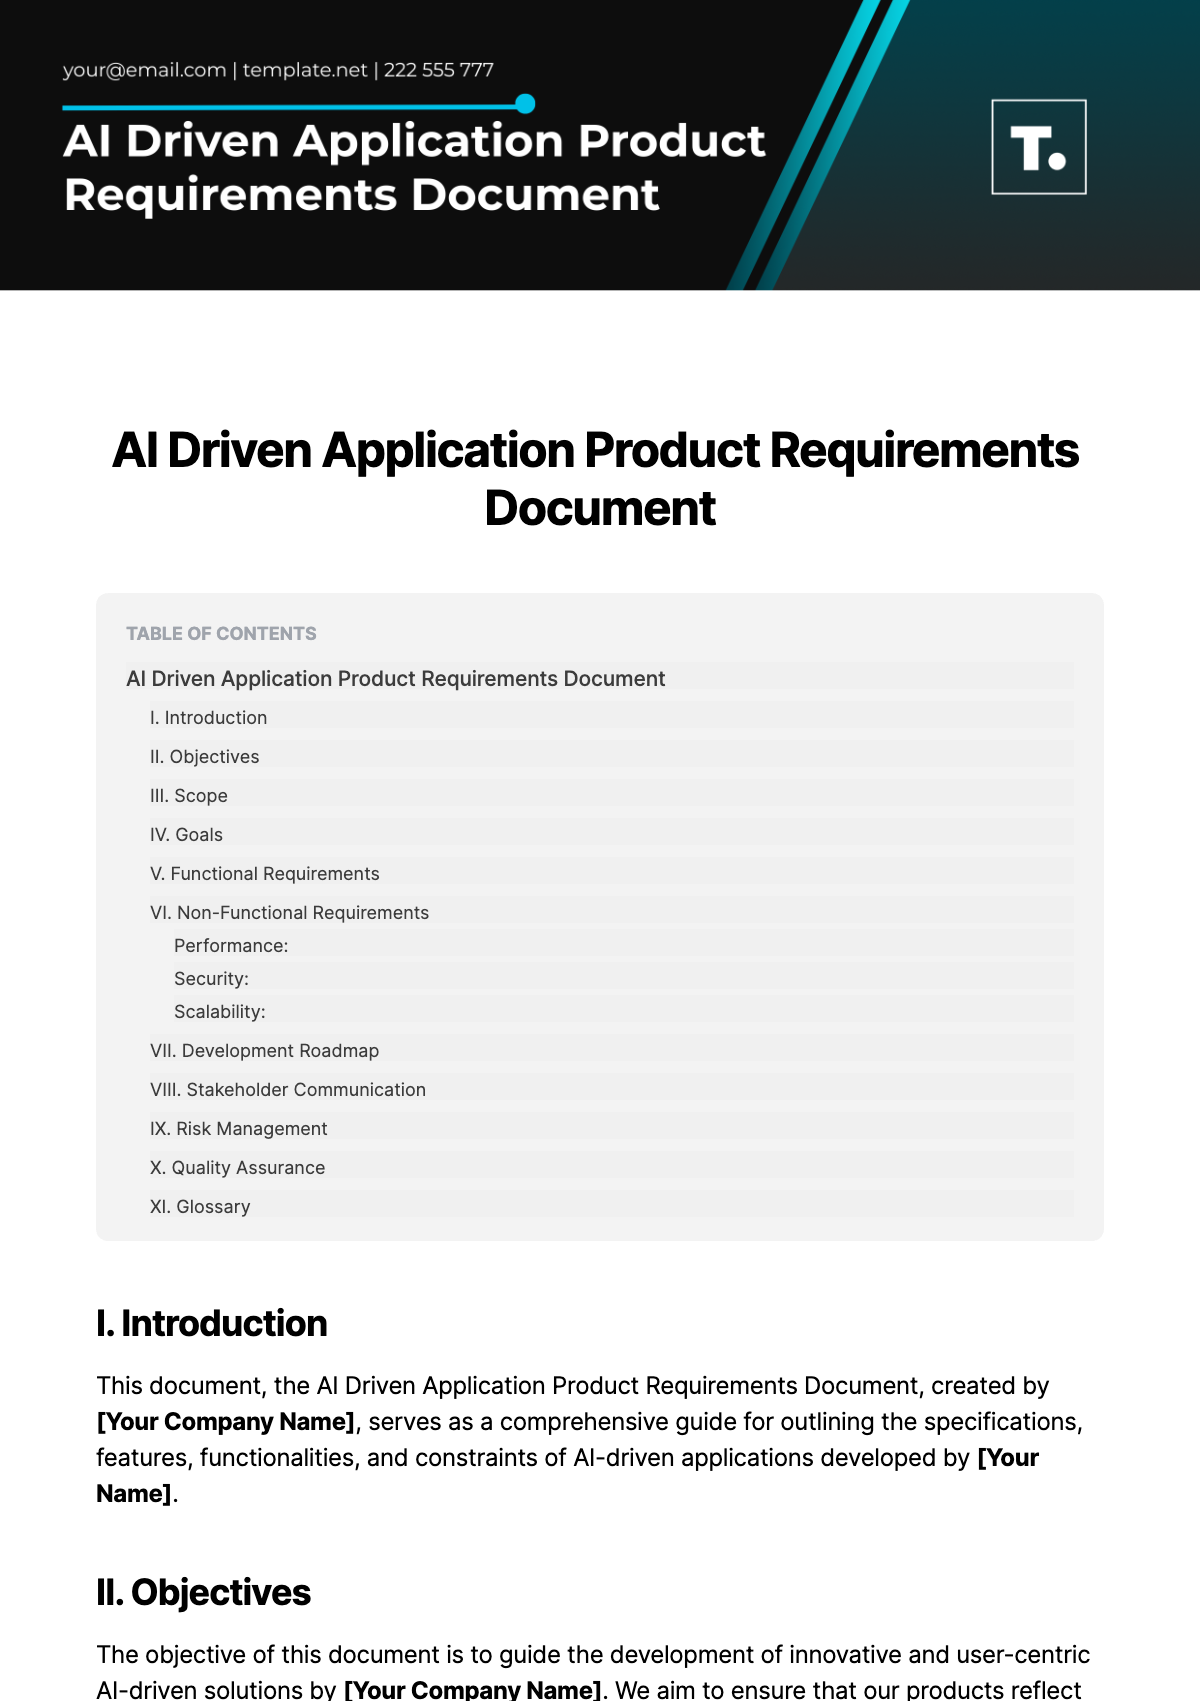 AI Driven Application Product Requirements Document Template